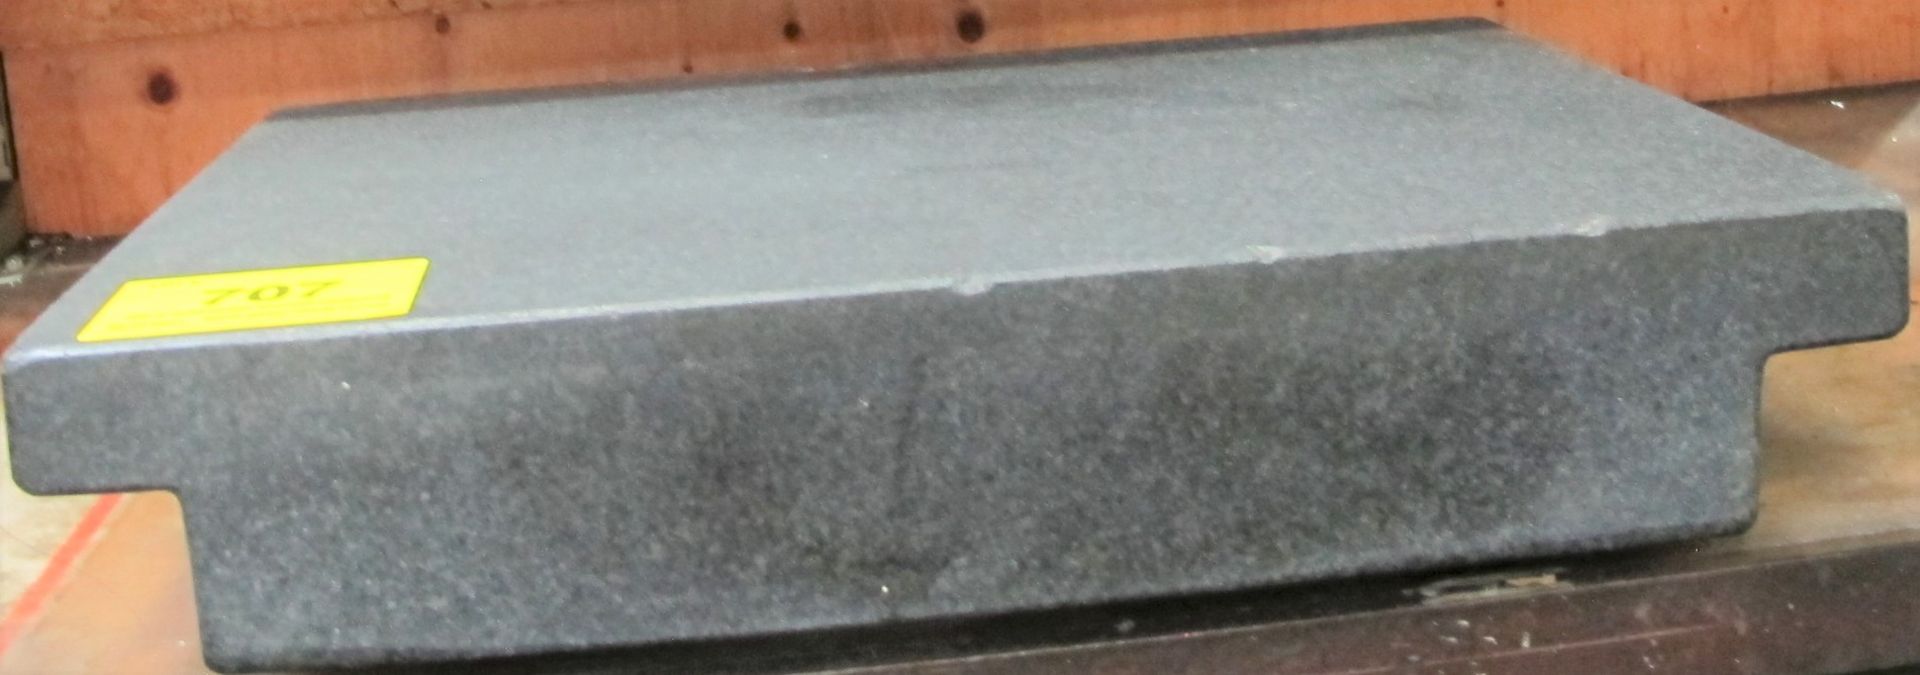 APPROX. 2'L X 18"W X 4"H GRANITE SURFACE PLATE - Image 2 of 2